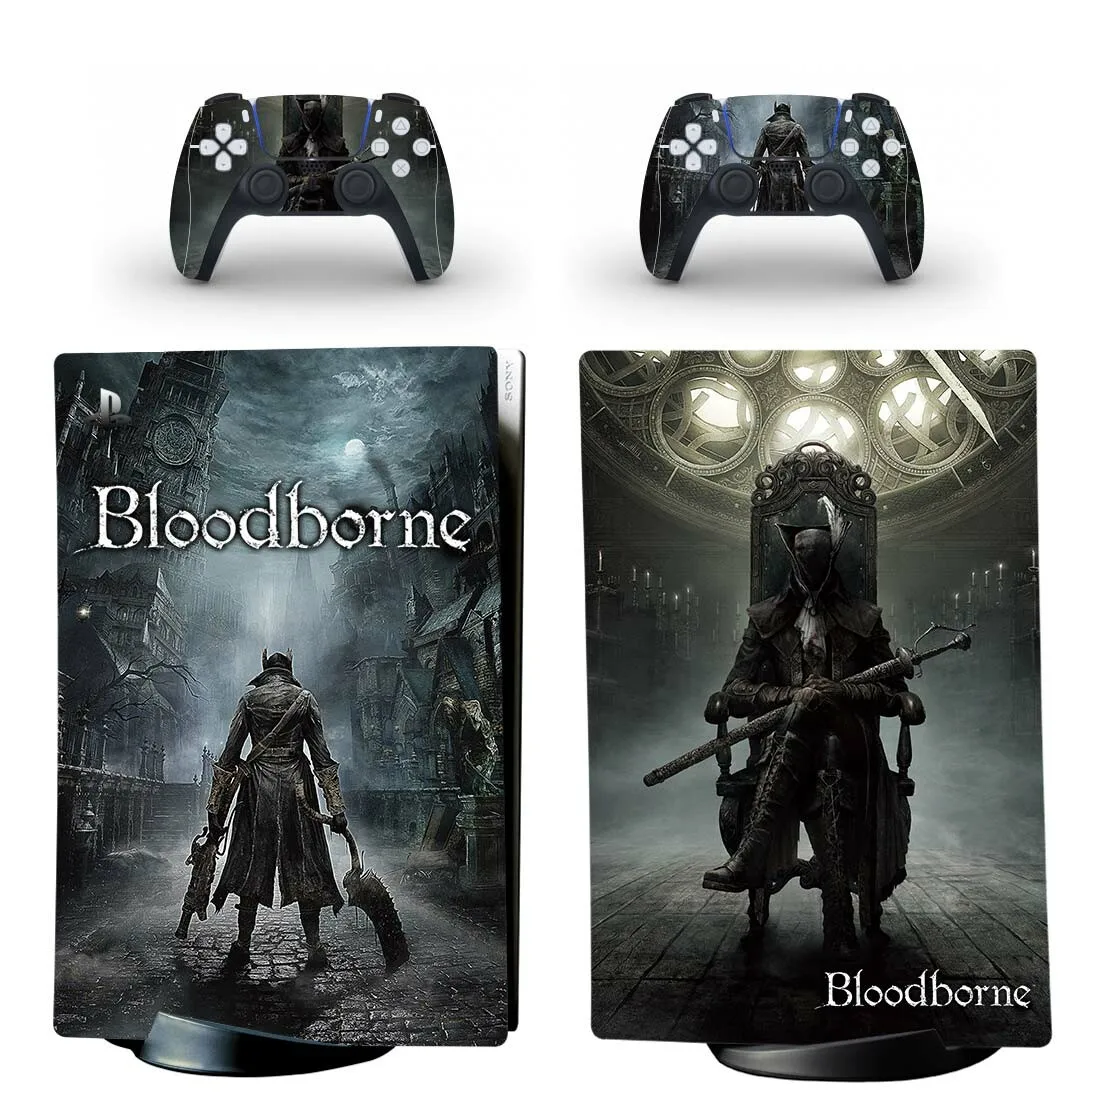 

Bloodborne PS5 Digital Skin Sticker Decal Cover for PlayStation 5 Console and 2 Controllers PS5 Skin Sticker Vinyl